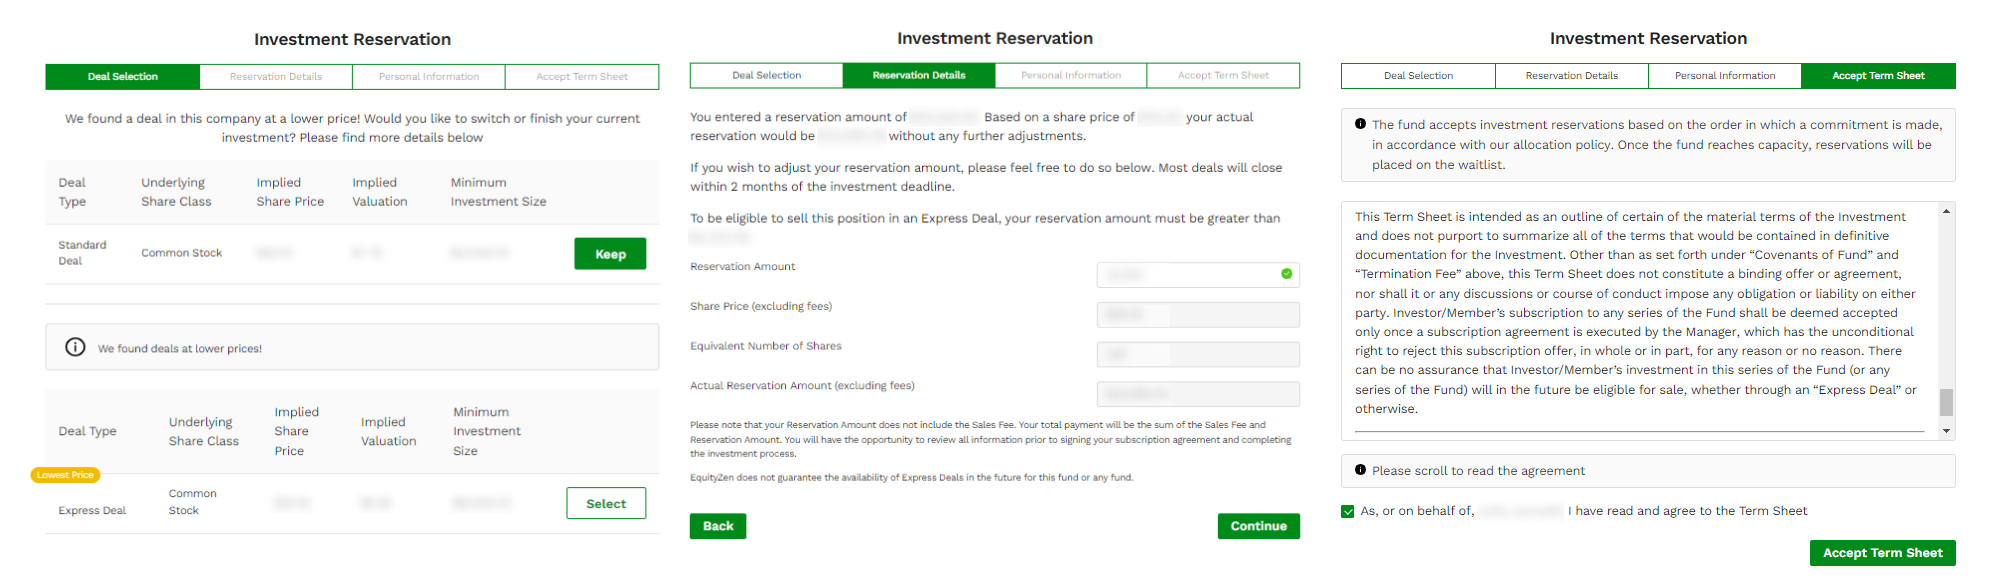 Sample of Investment Reservation process steps